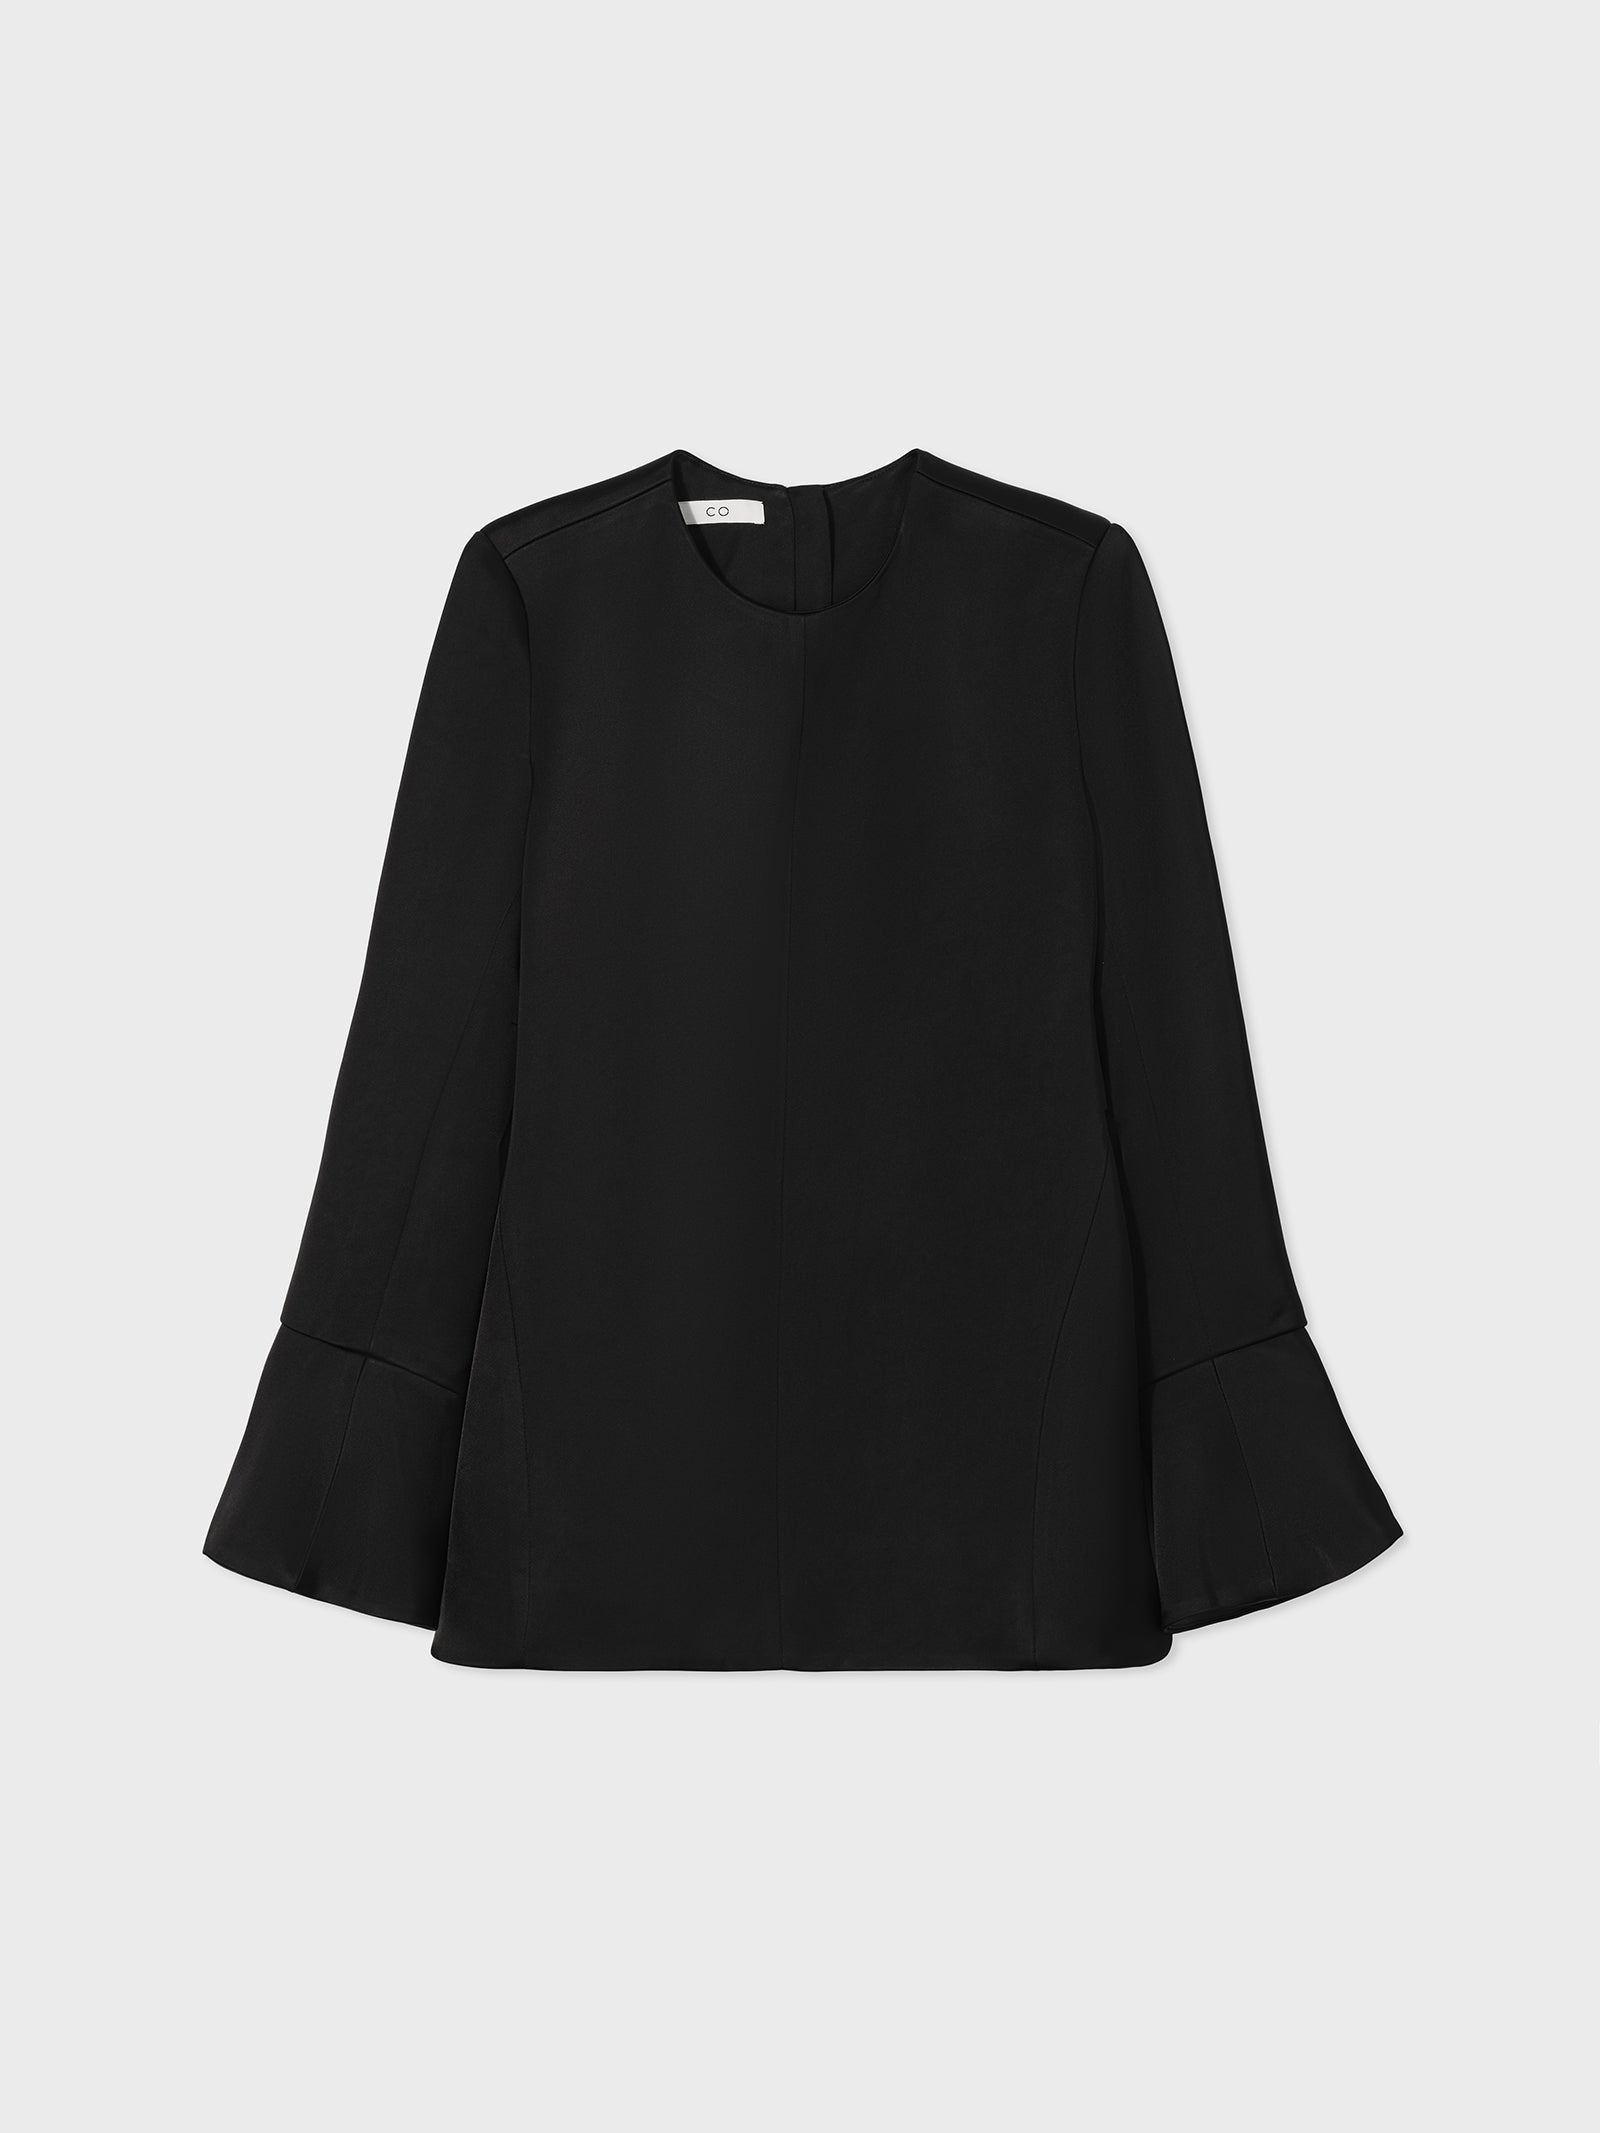 Peplum Sleeve Top in Satin Crepe - Black - CO Collections